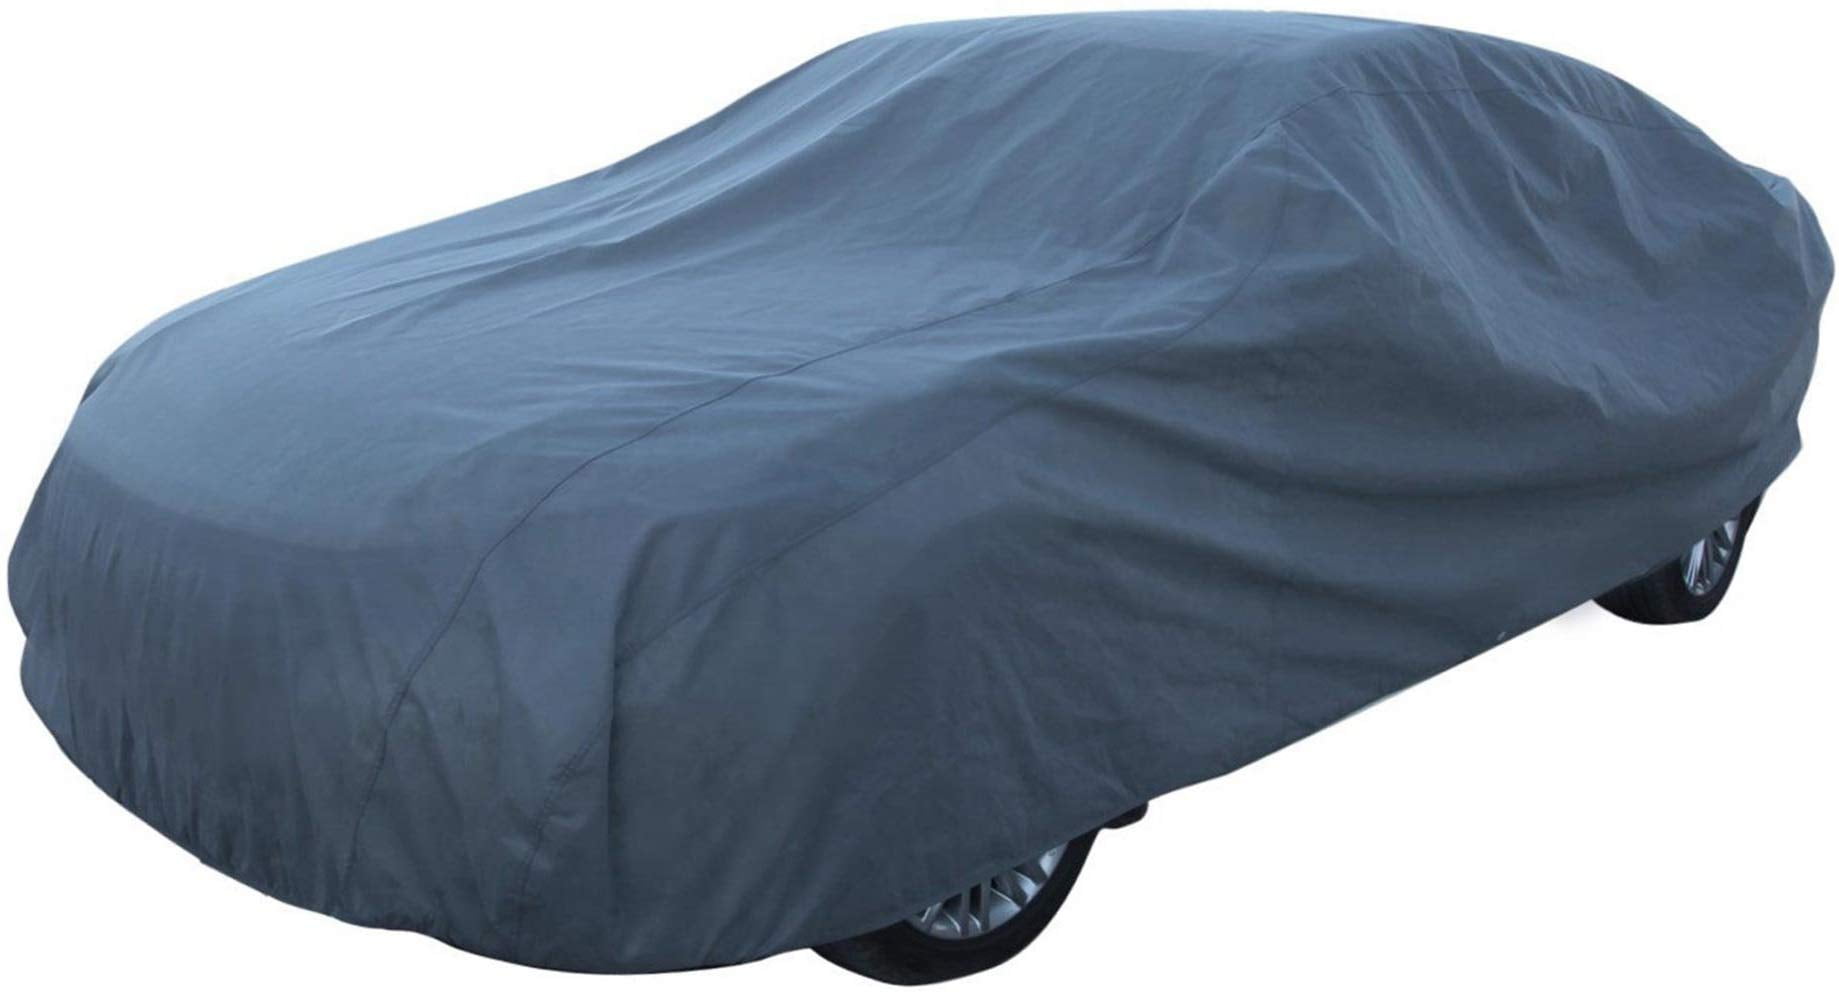 Cars up to 142 226 574x160x127cm Leader Accessories Car Cover Basic Guard 3 Layer Universal Fit Outdoor Use Sedan Cover